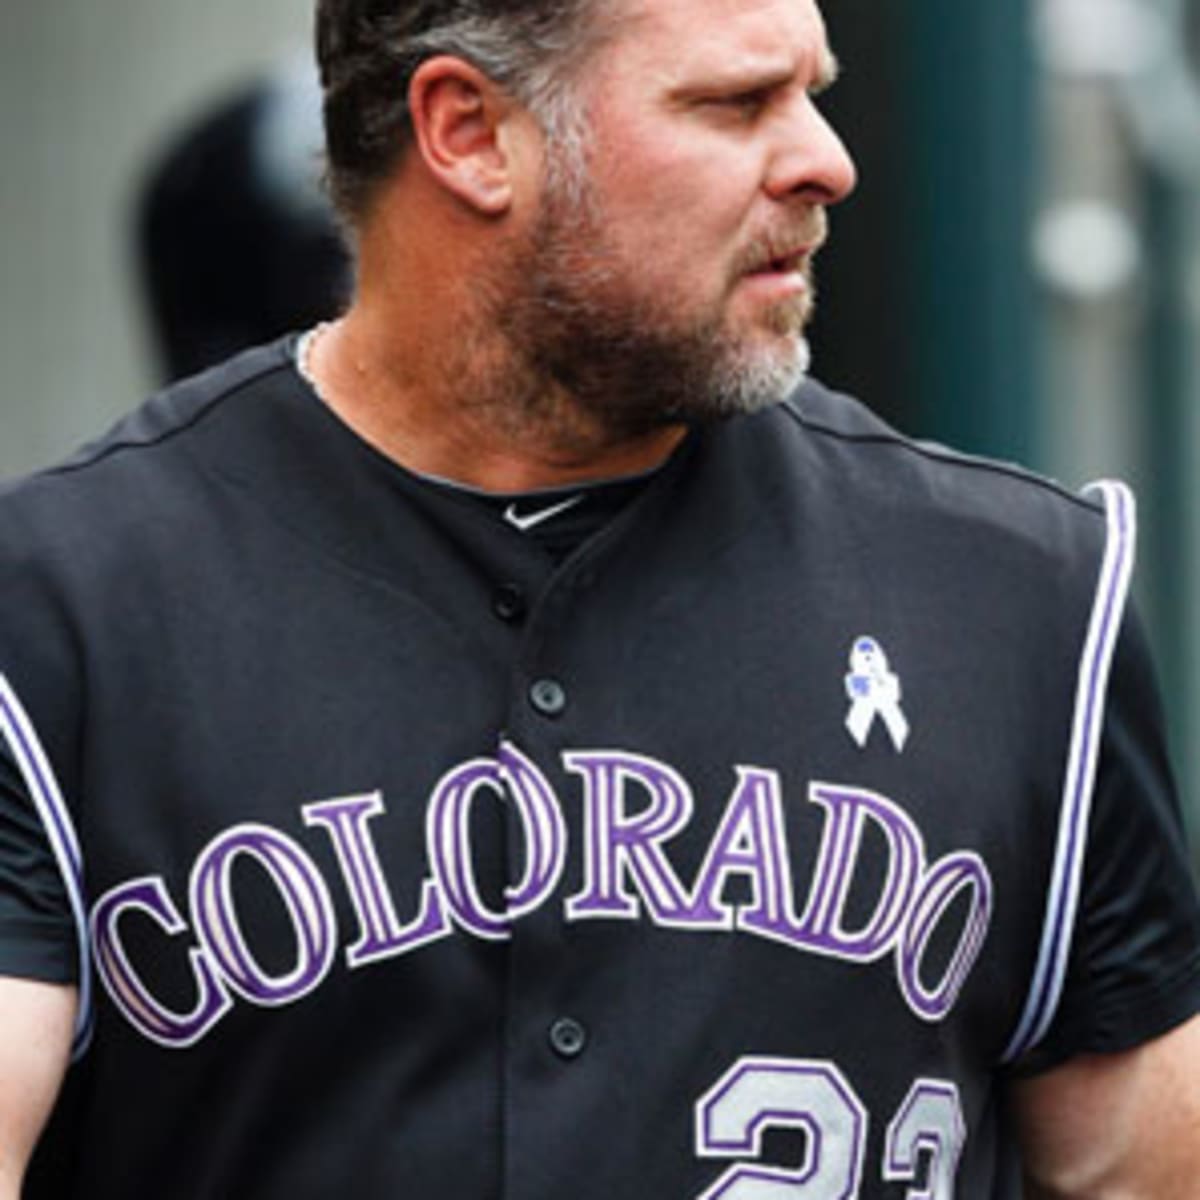 Rockies skipper Tracy excited by Jason Giambi signing – The Denver Post